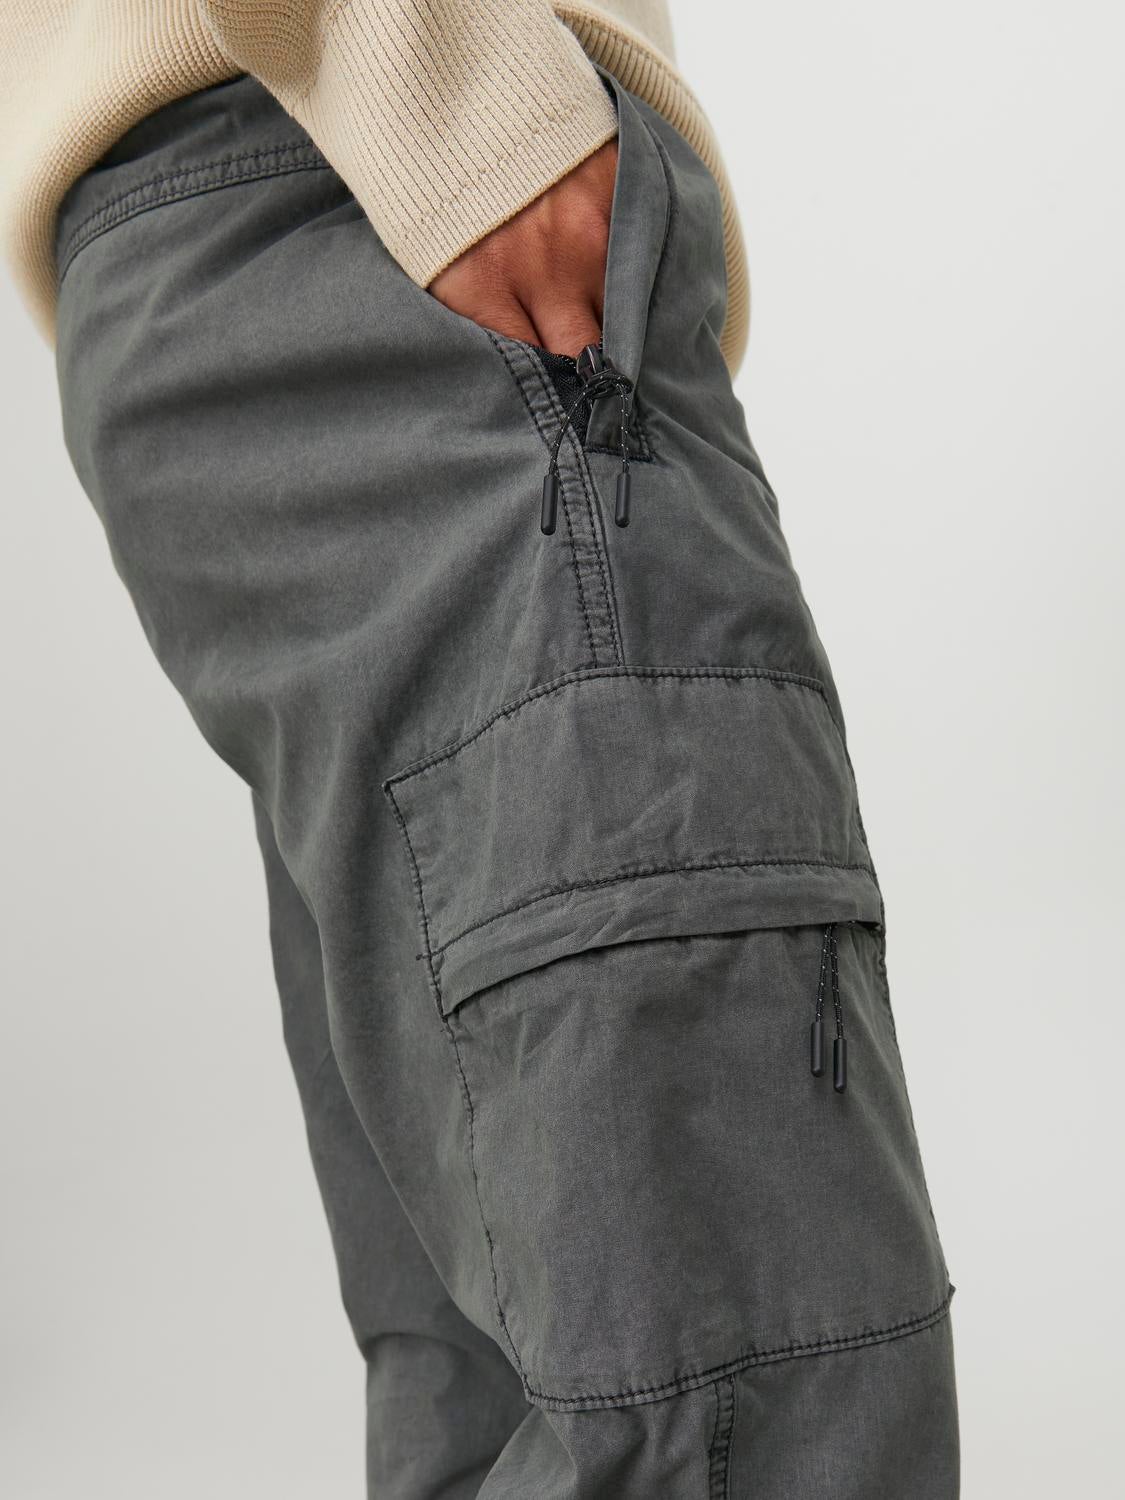 Norse Store | Shipping Worldwide - And Wander Oversized Cargo Pants - Gray